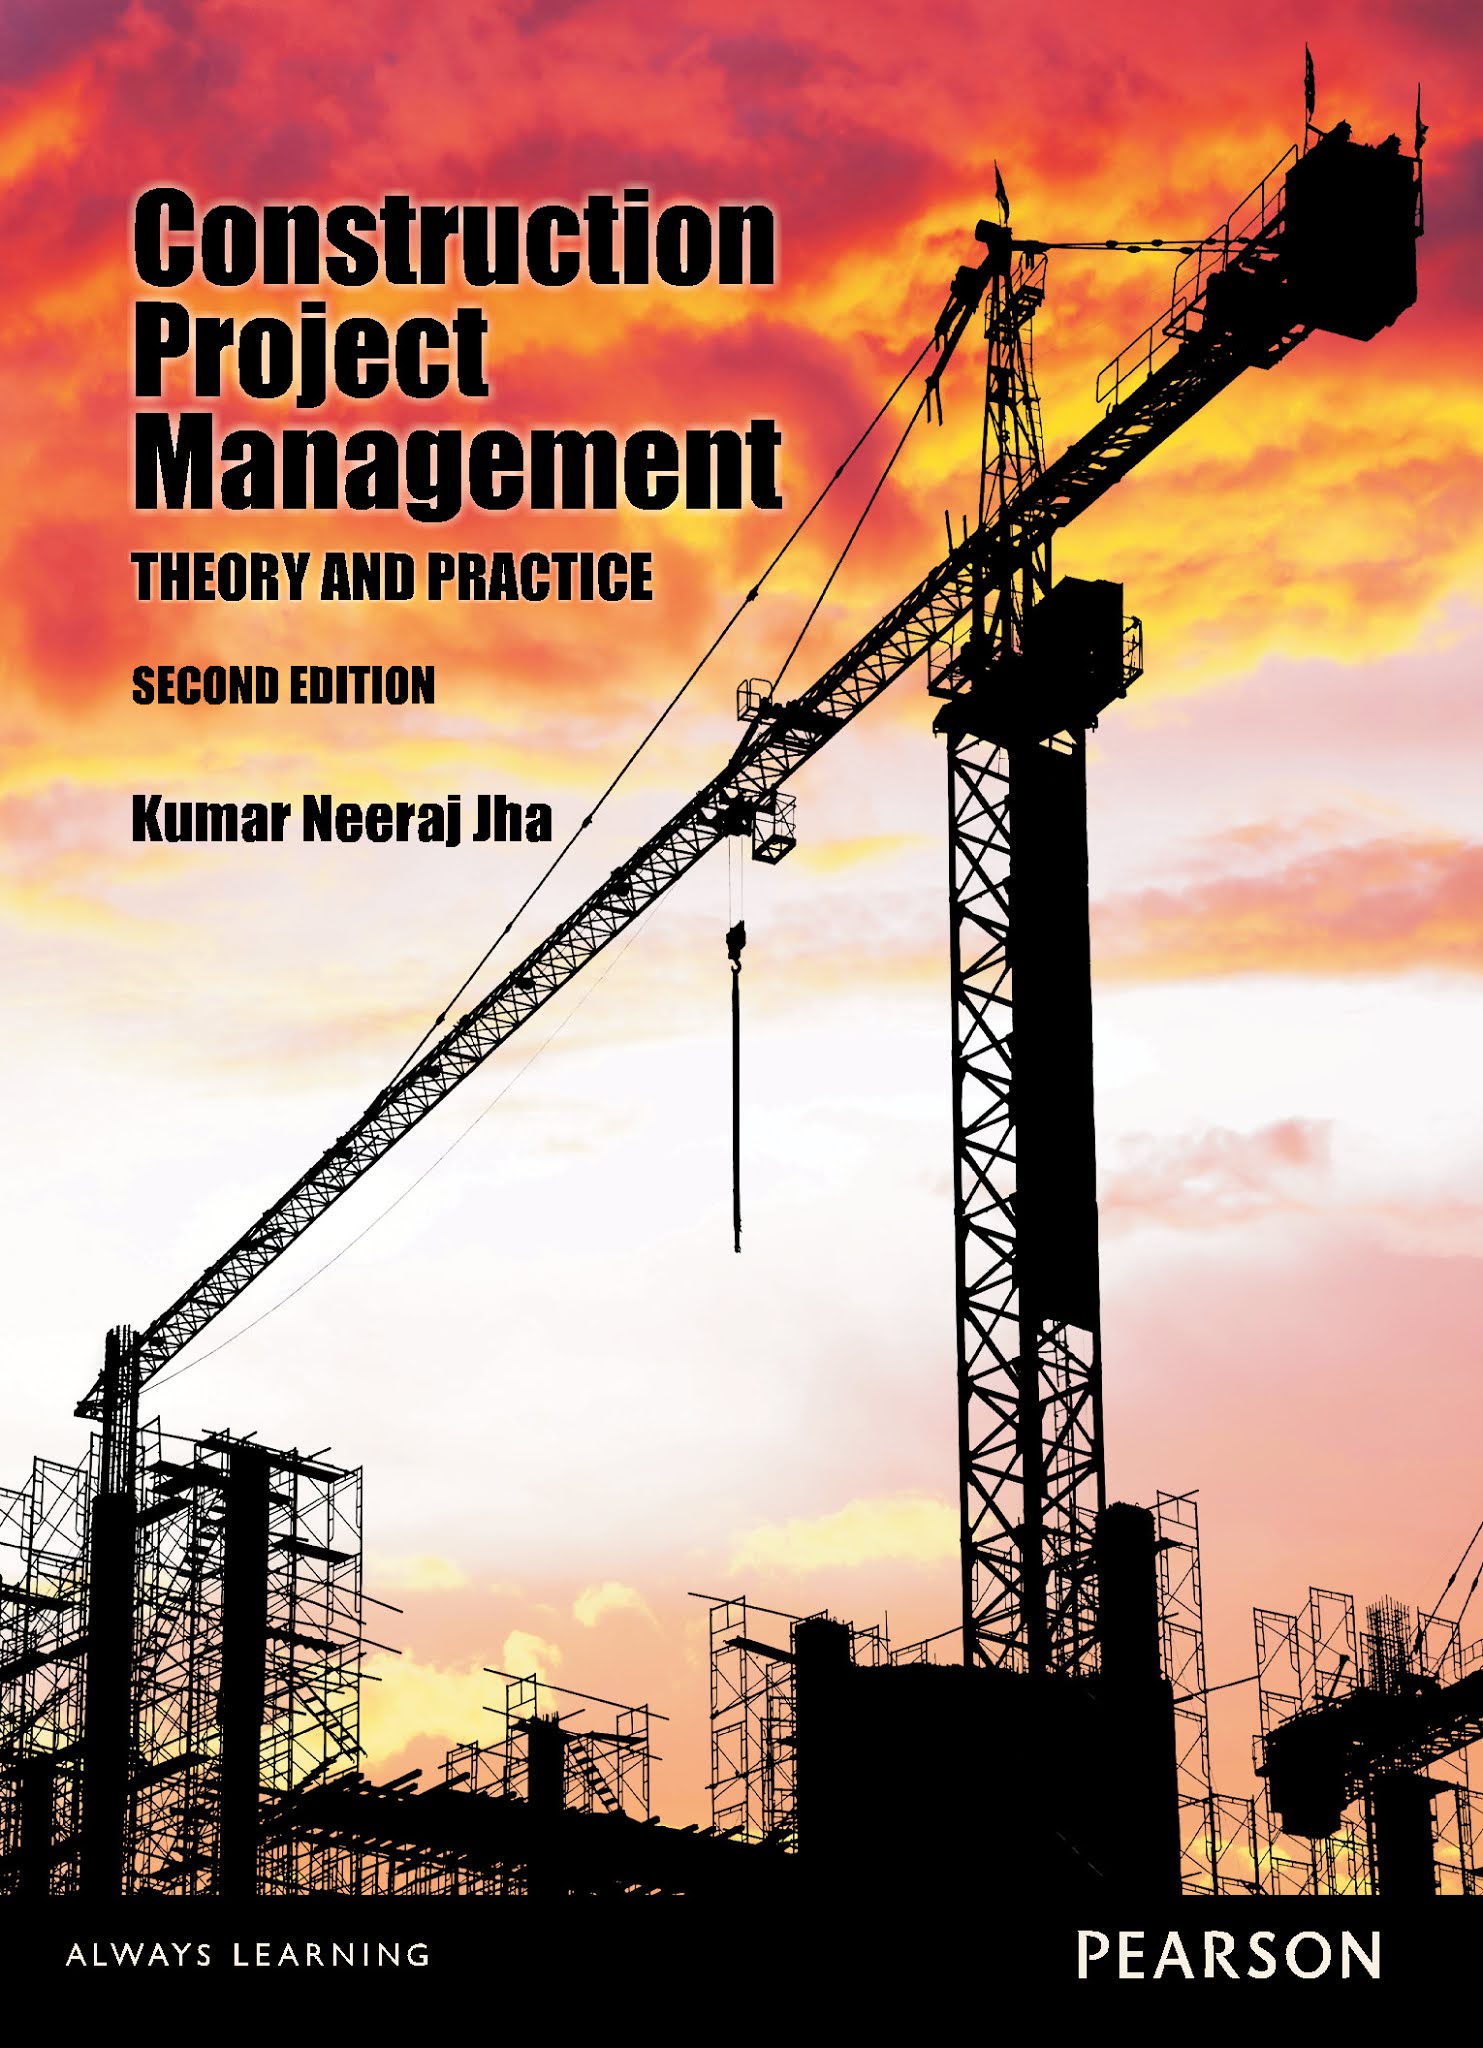 project management in construction research topics